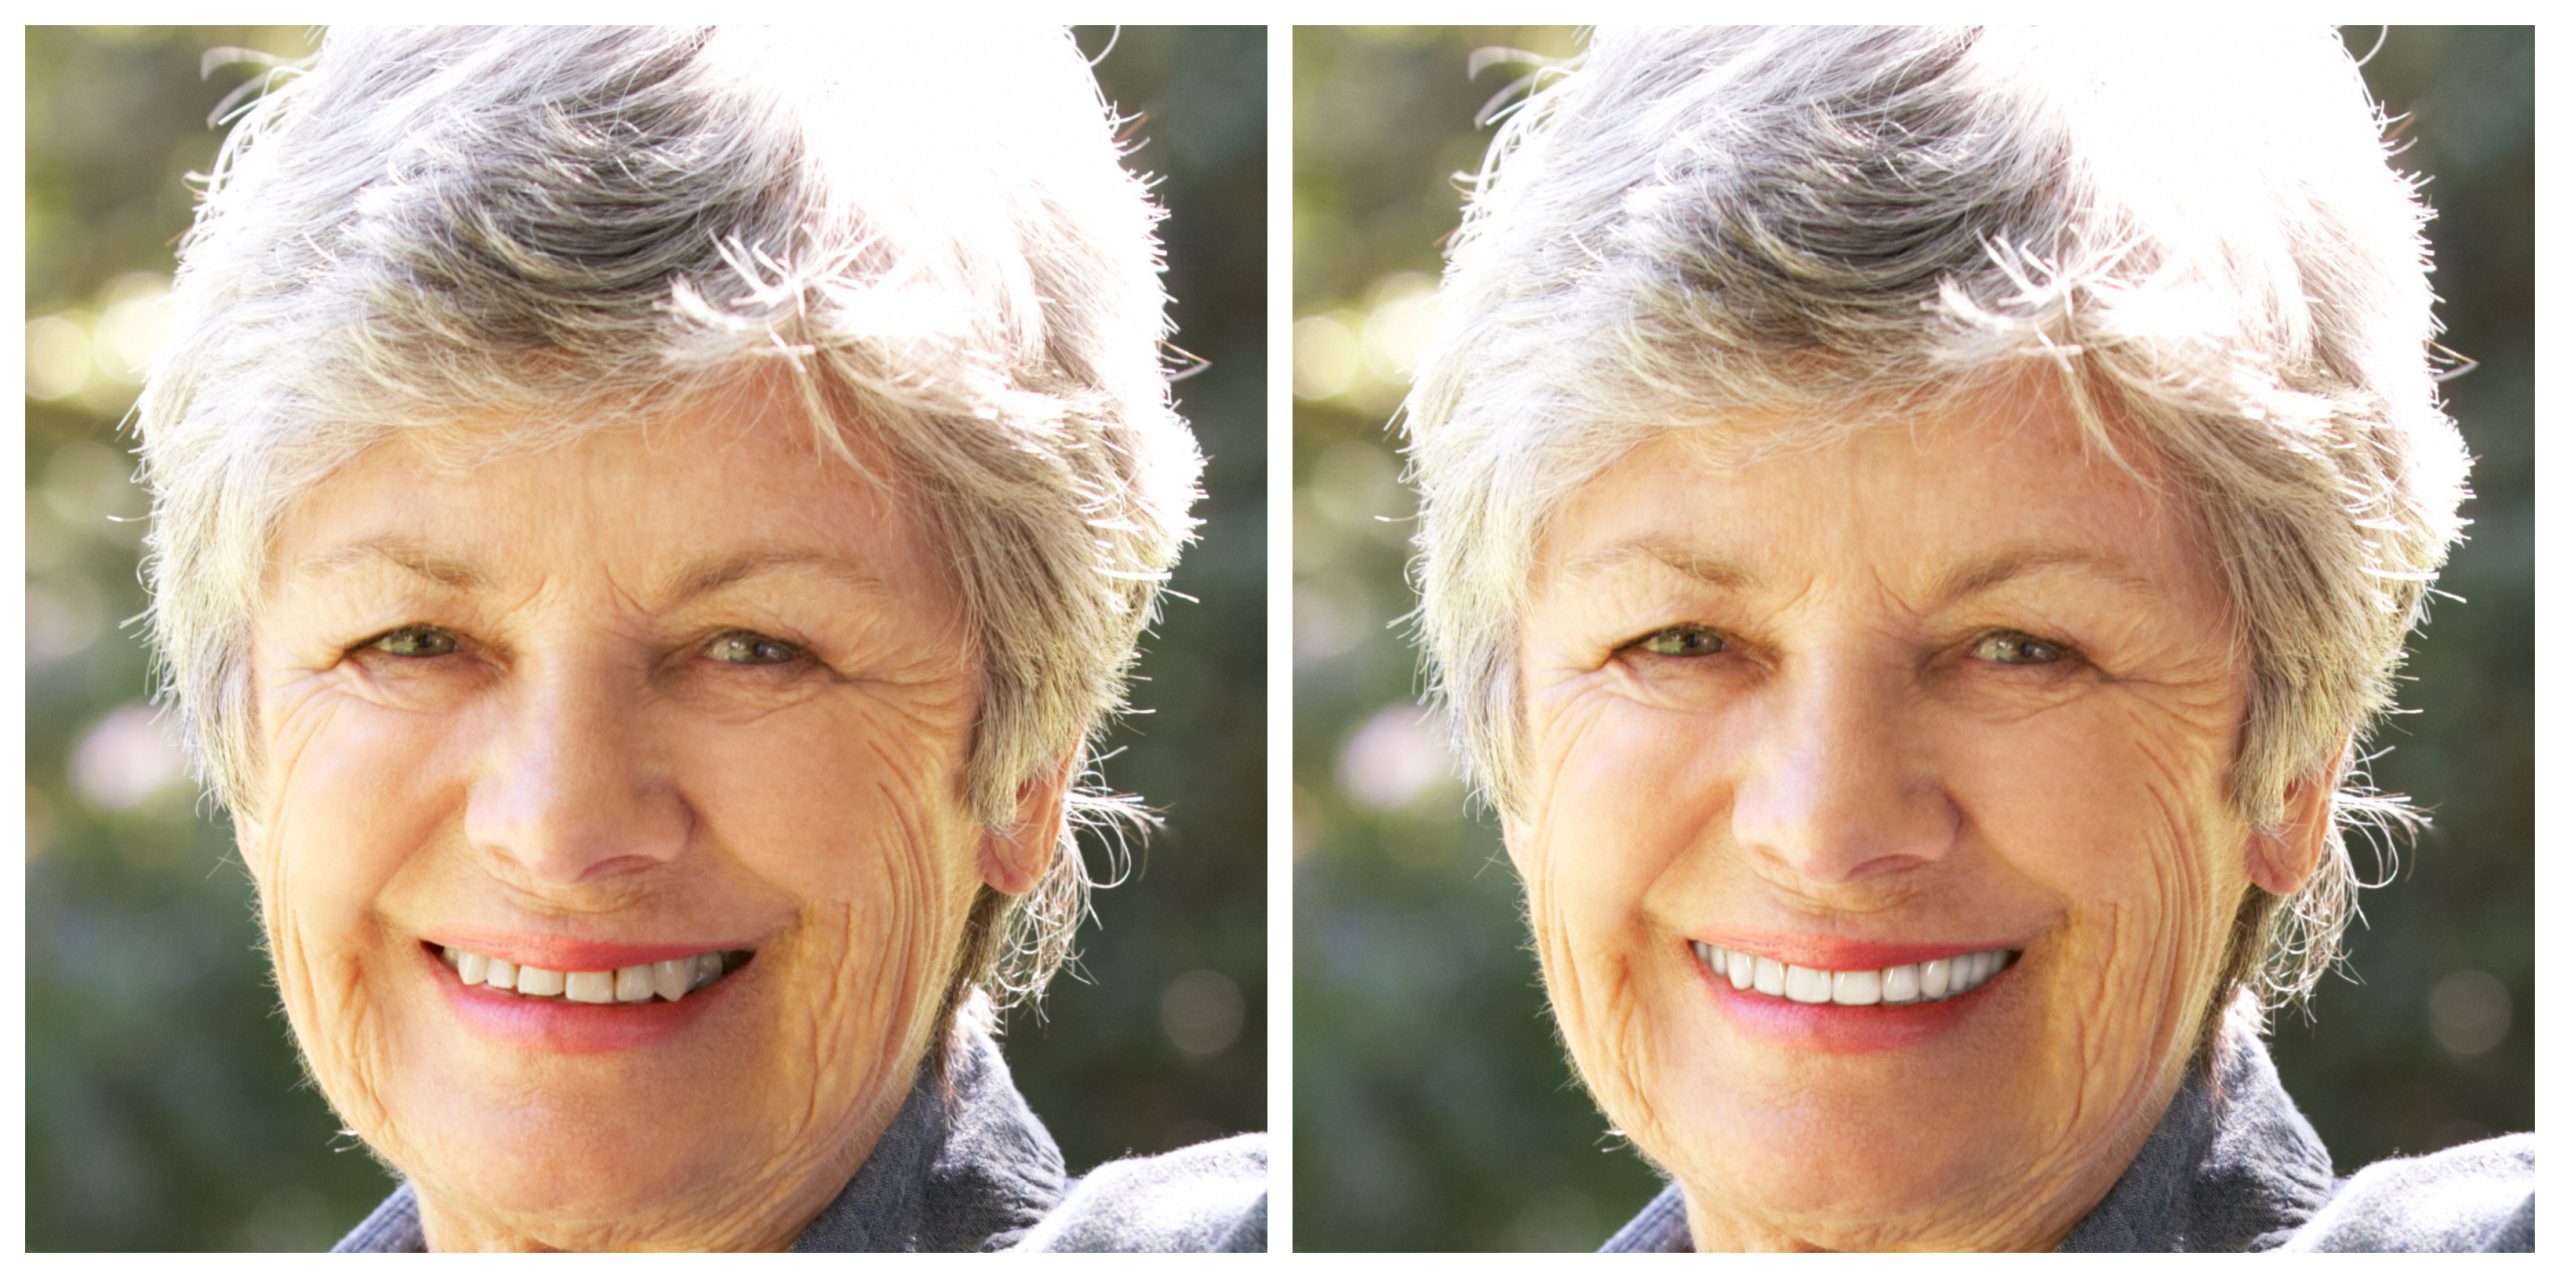 Smile Restoration - Before and After2